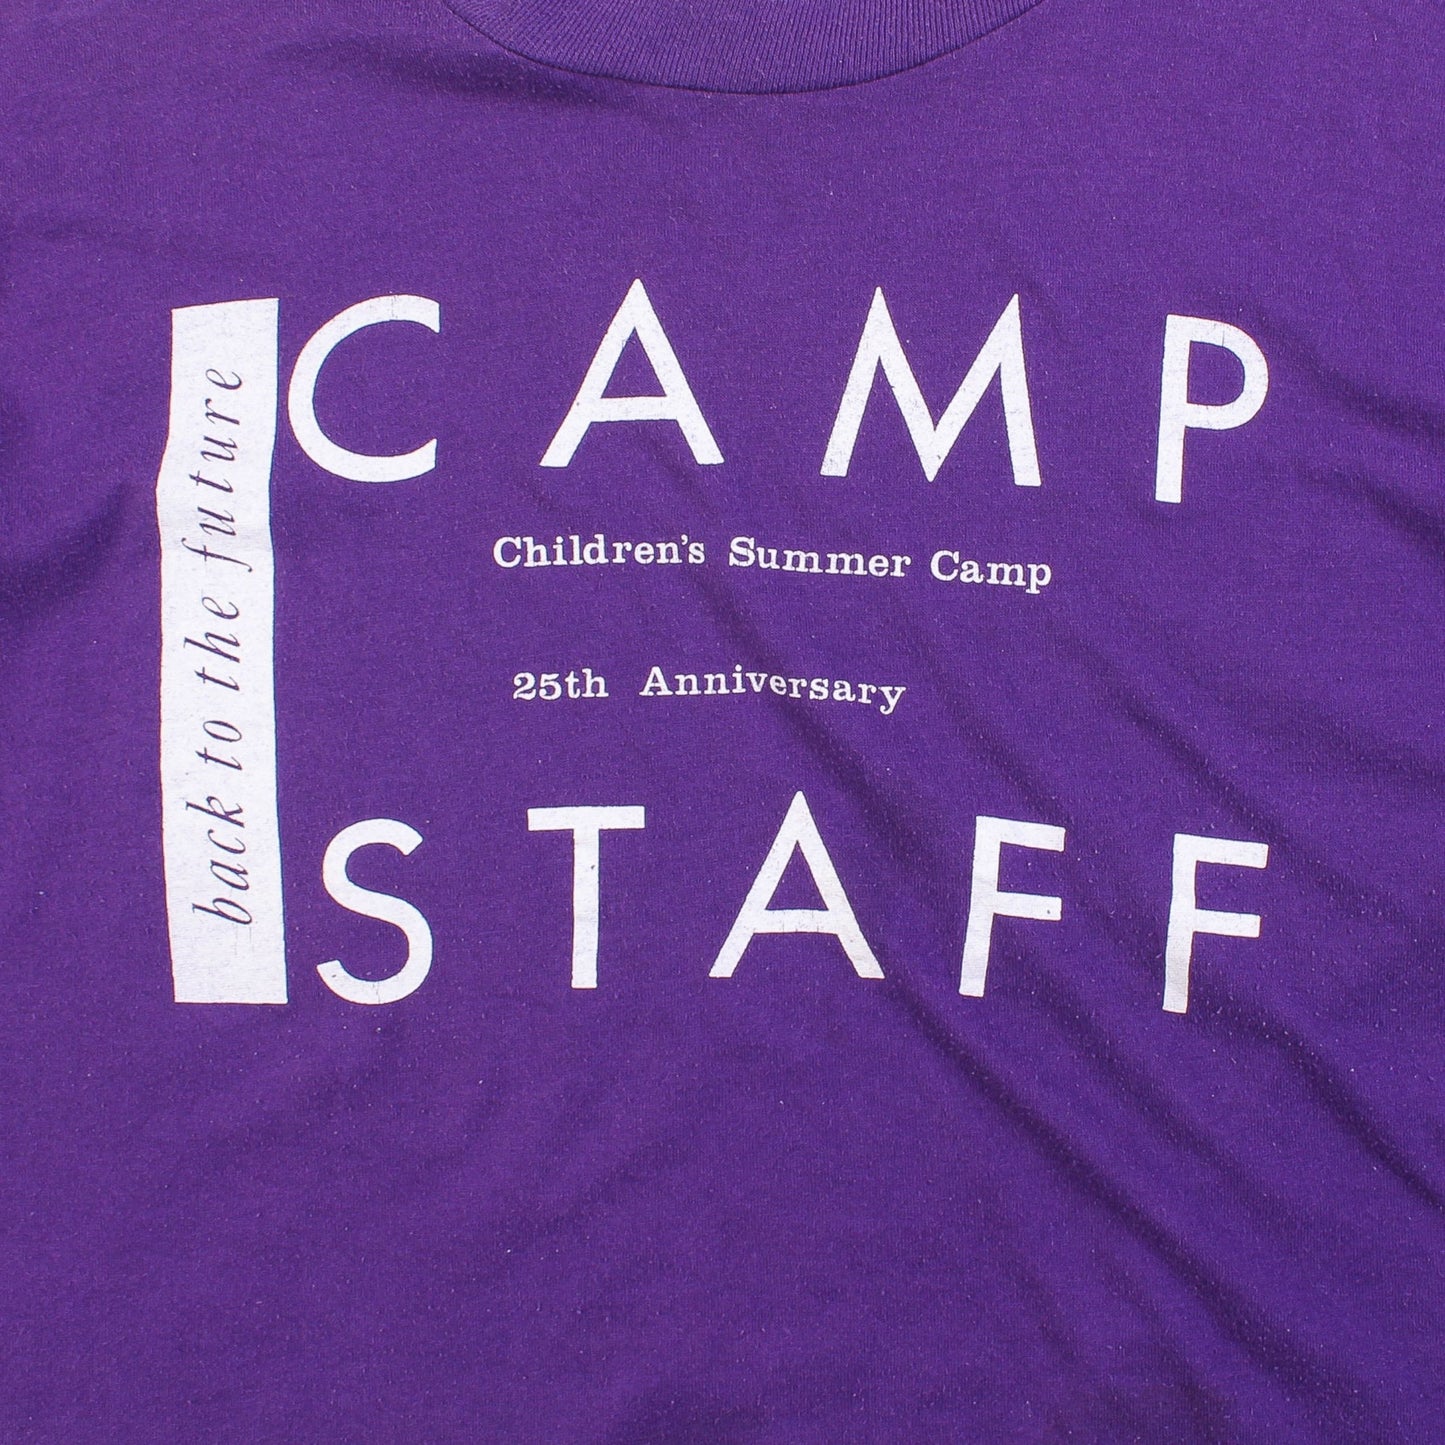 Vintage 'Camp Staff' T-Shirt - American Madness